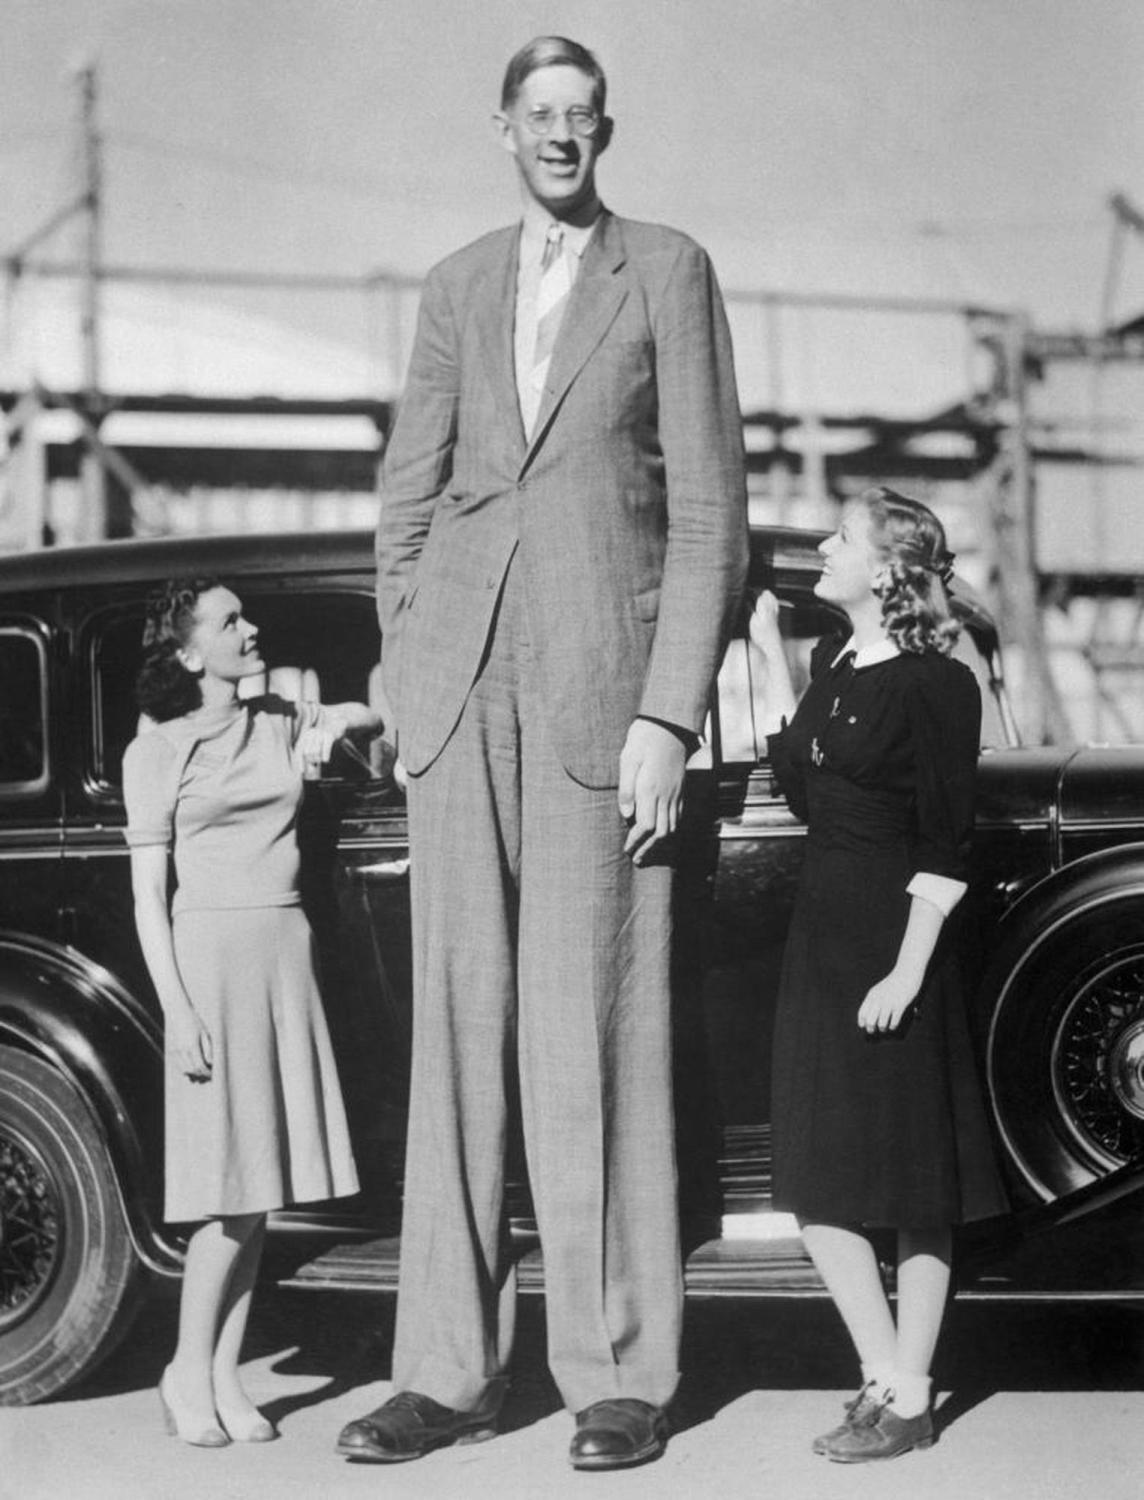 The Fascinating Life Of Robert Wadlow, The Tallest Human In History